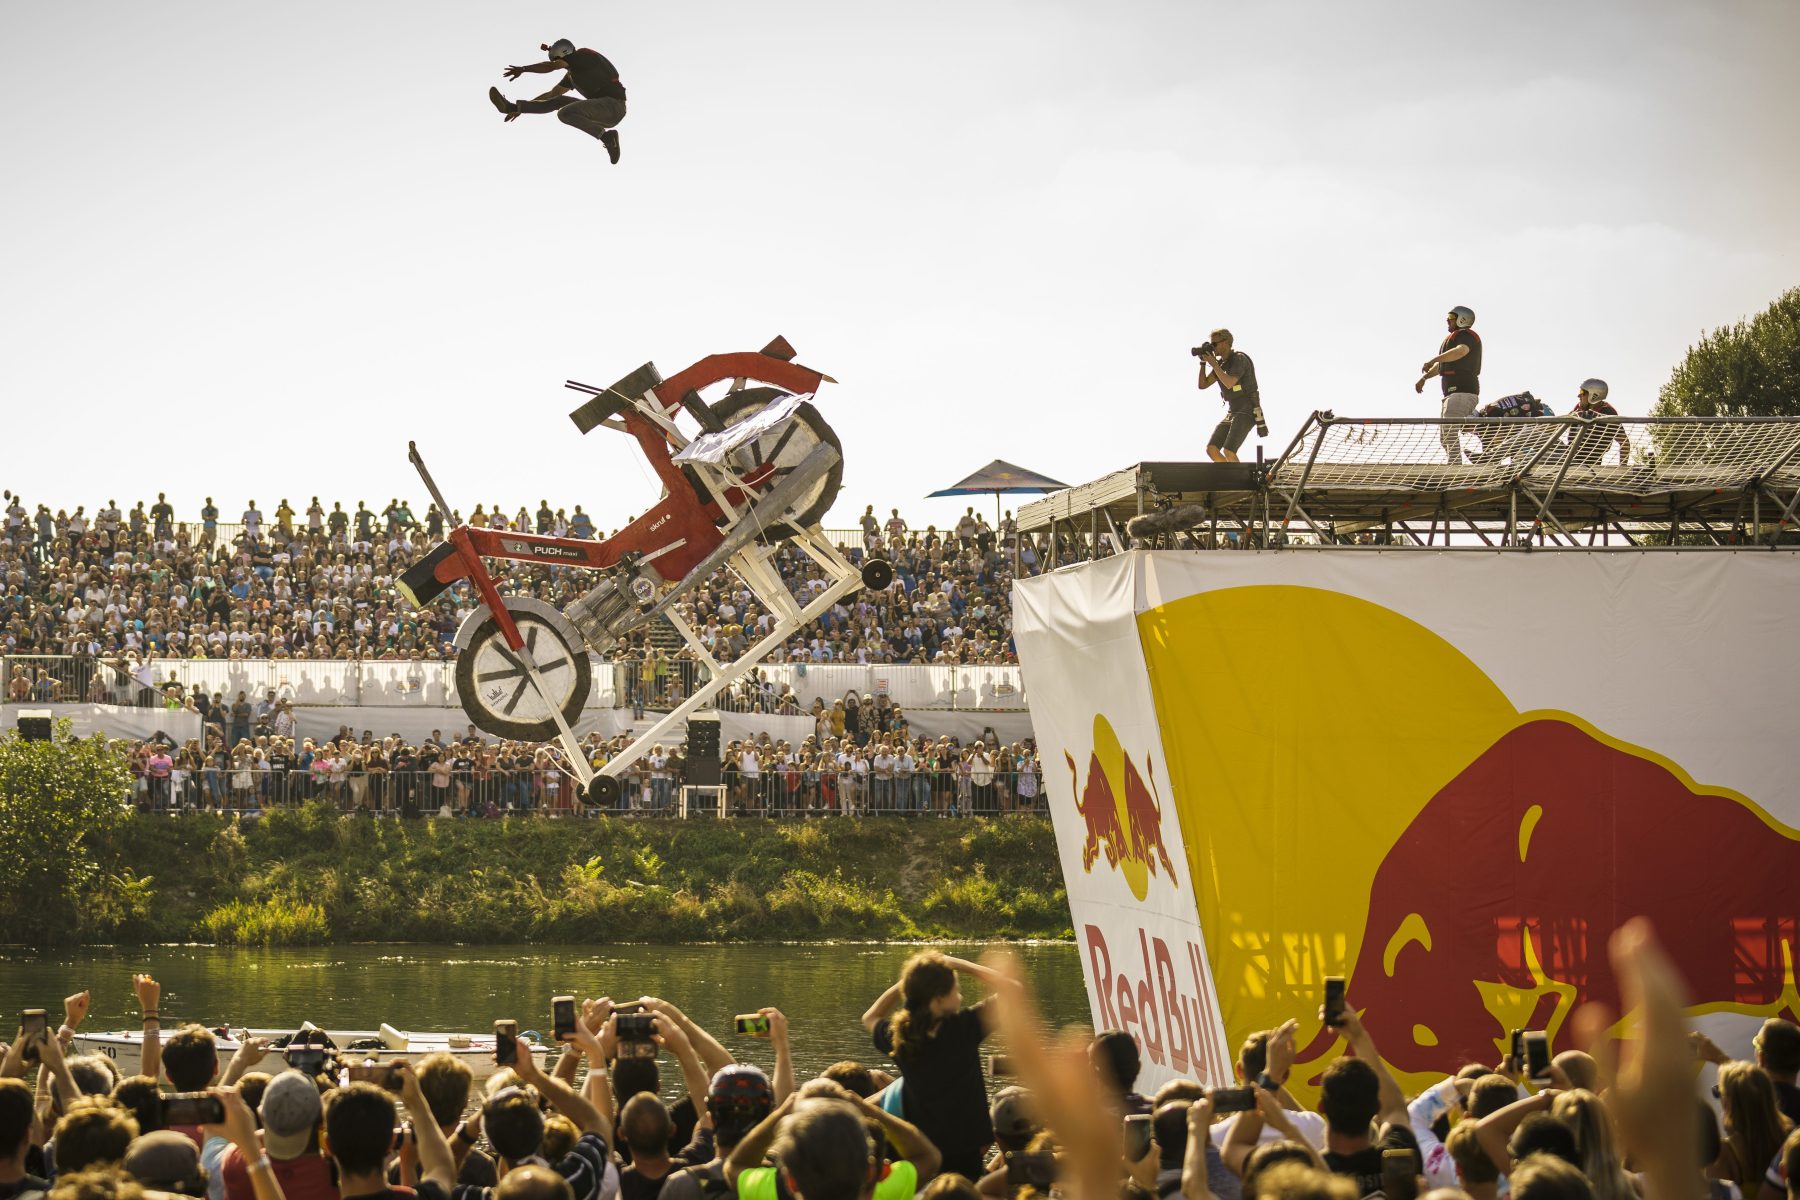 <p>Since <a href="https://www.redbull.com/us-en/events/red-bull-flugtag-milwaukee">Red Bull Flugtag</a> began in 1992 over the scenic Danube River in Vienna, human-powered wings have taken off from 96 cities spread across 50 countries during 174 events. The event celebrated its 30th anniversary in mid-July as 34 teams made a splash into Lake Michigan at Milwaukee’s Veterans Park in front of more than 50,000 spectators In Flugtag, the crafts are judged on three criteria: the creativity and design of their craft, the showmanship of their skit and the distance traveled after taking off from the 27-foot platform. Courtesy of Red Bull, here’s a look back at three decades of high-flying fun at Flugtag.</p>